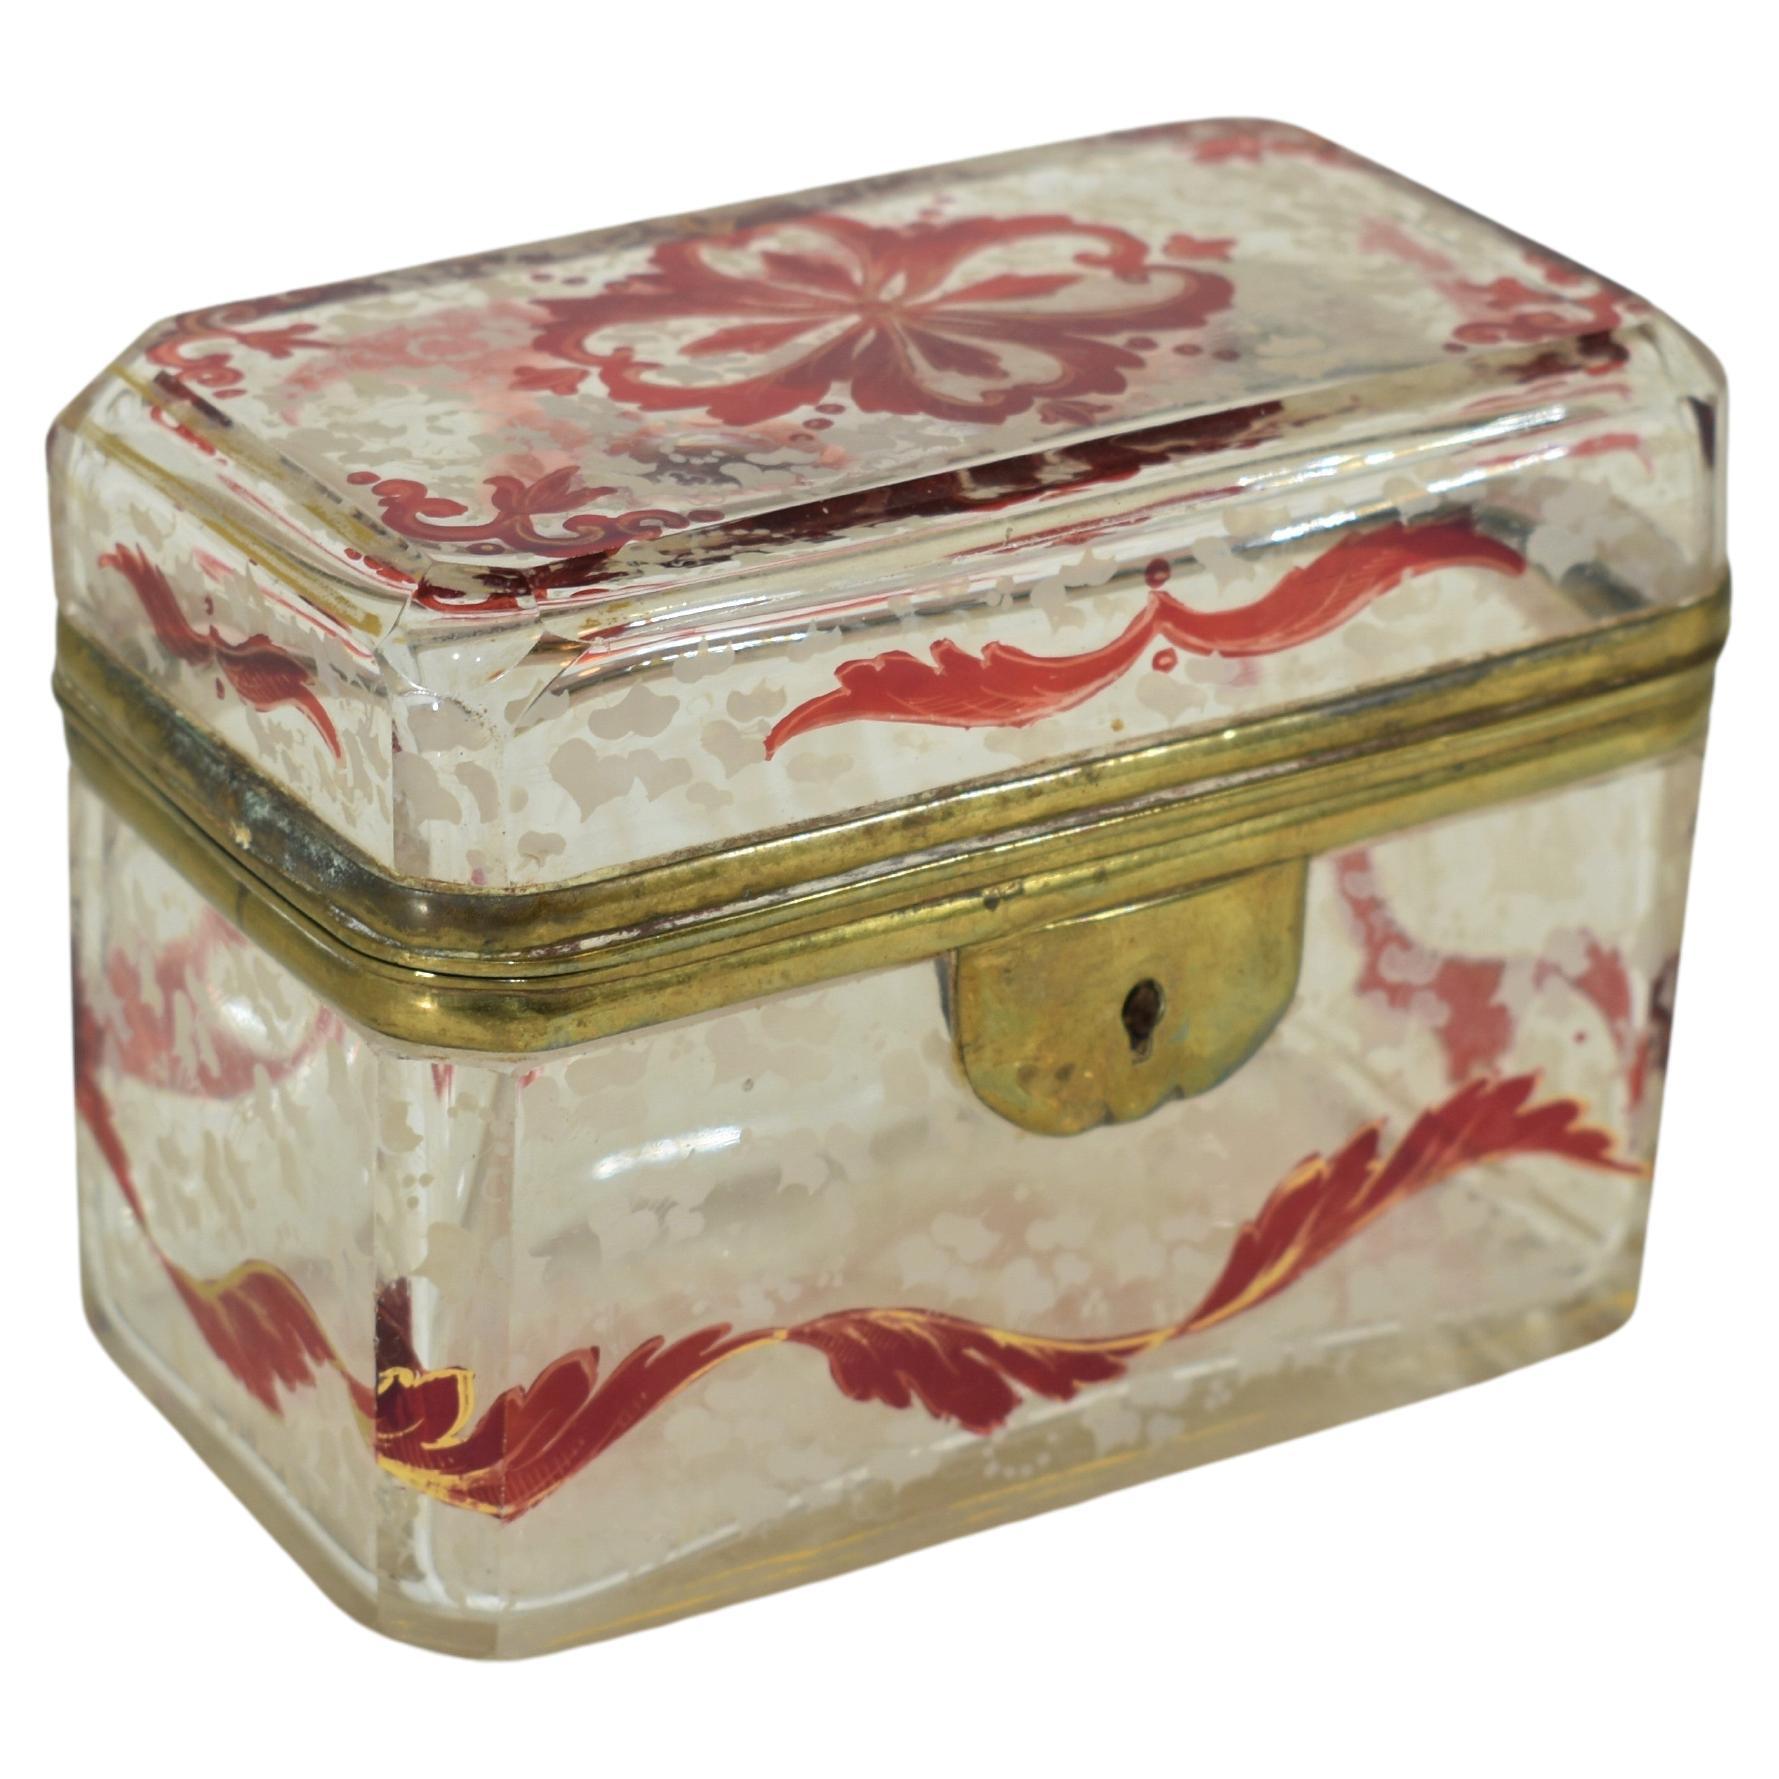 Antique Bohemian Clear and Ruby Enameled Glass Casket Box, 19th Century